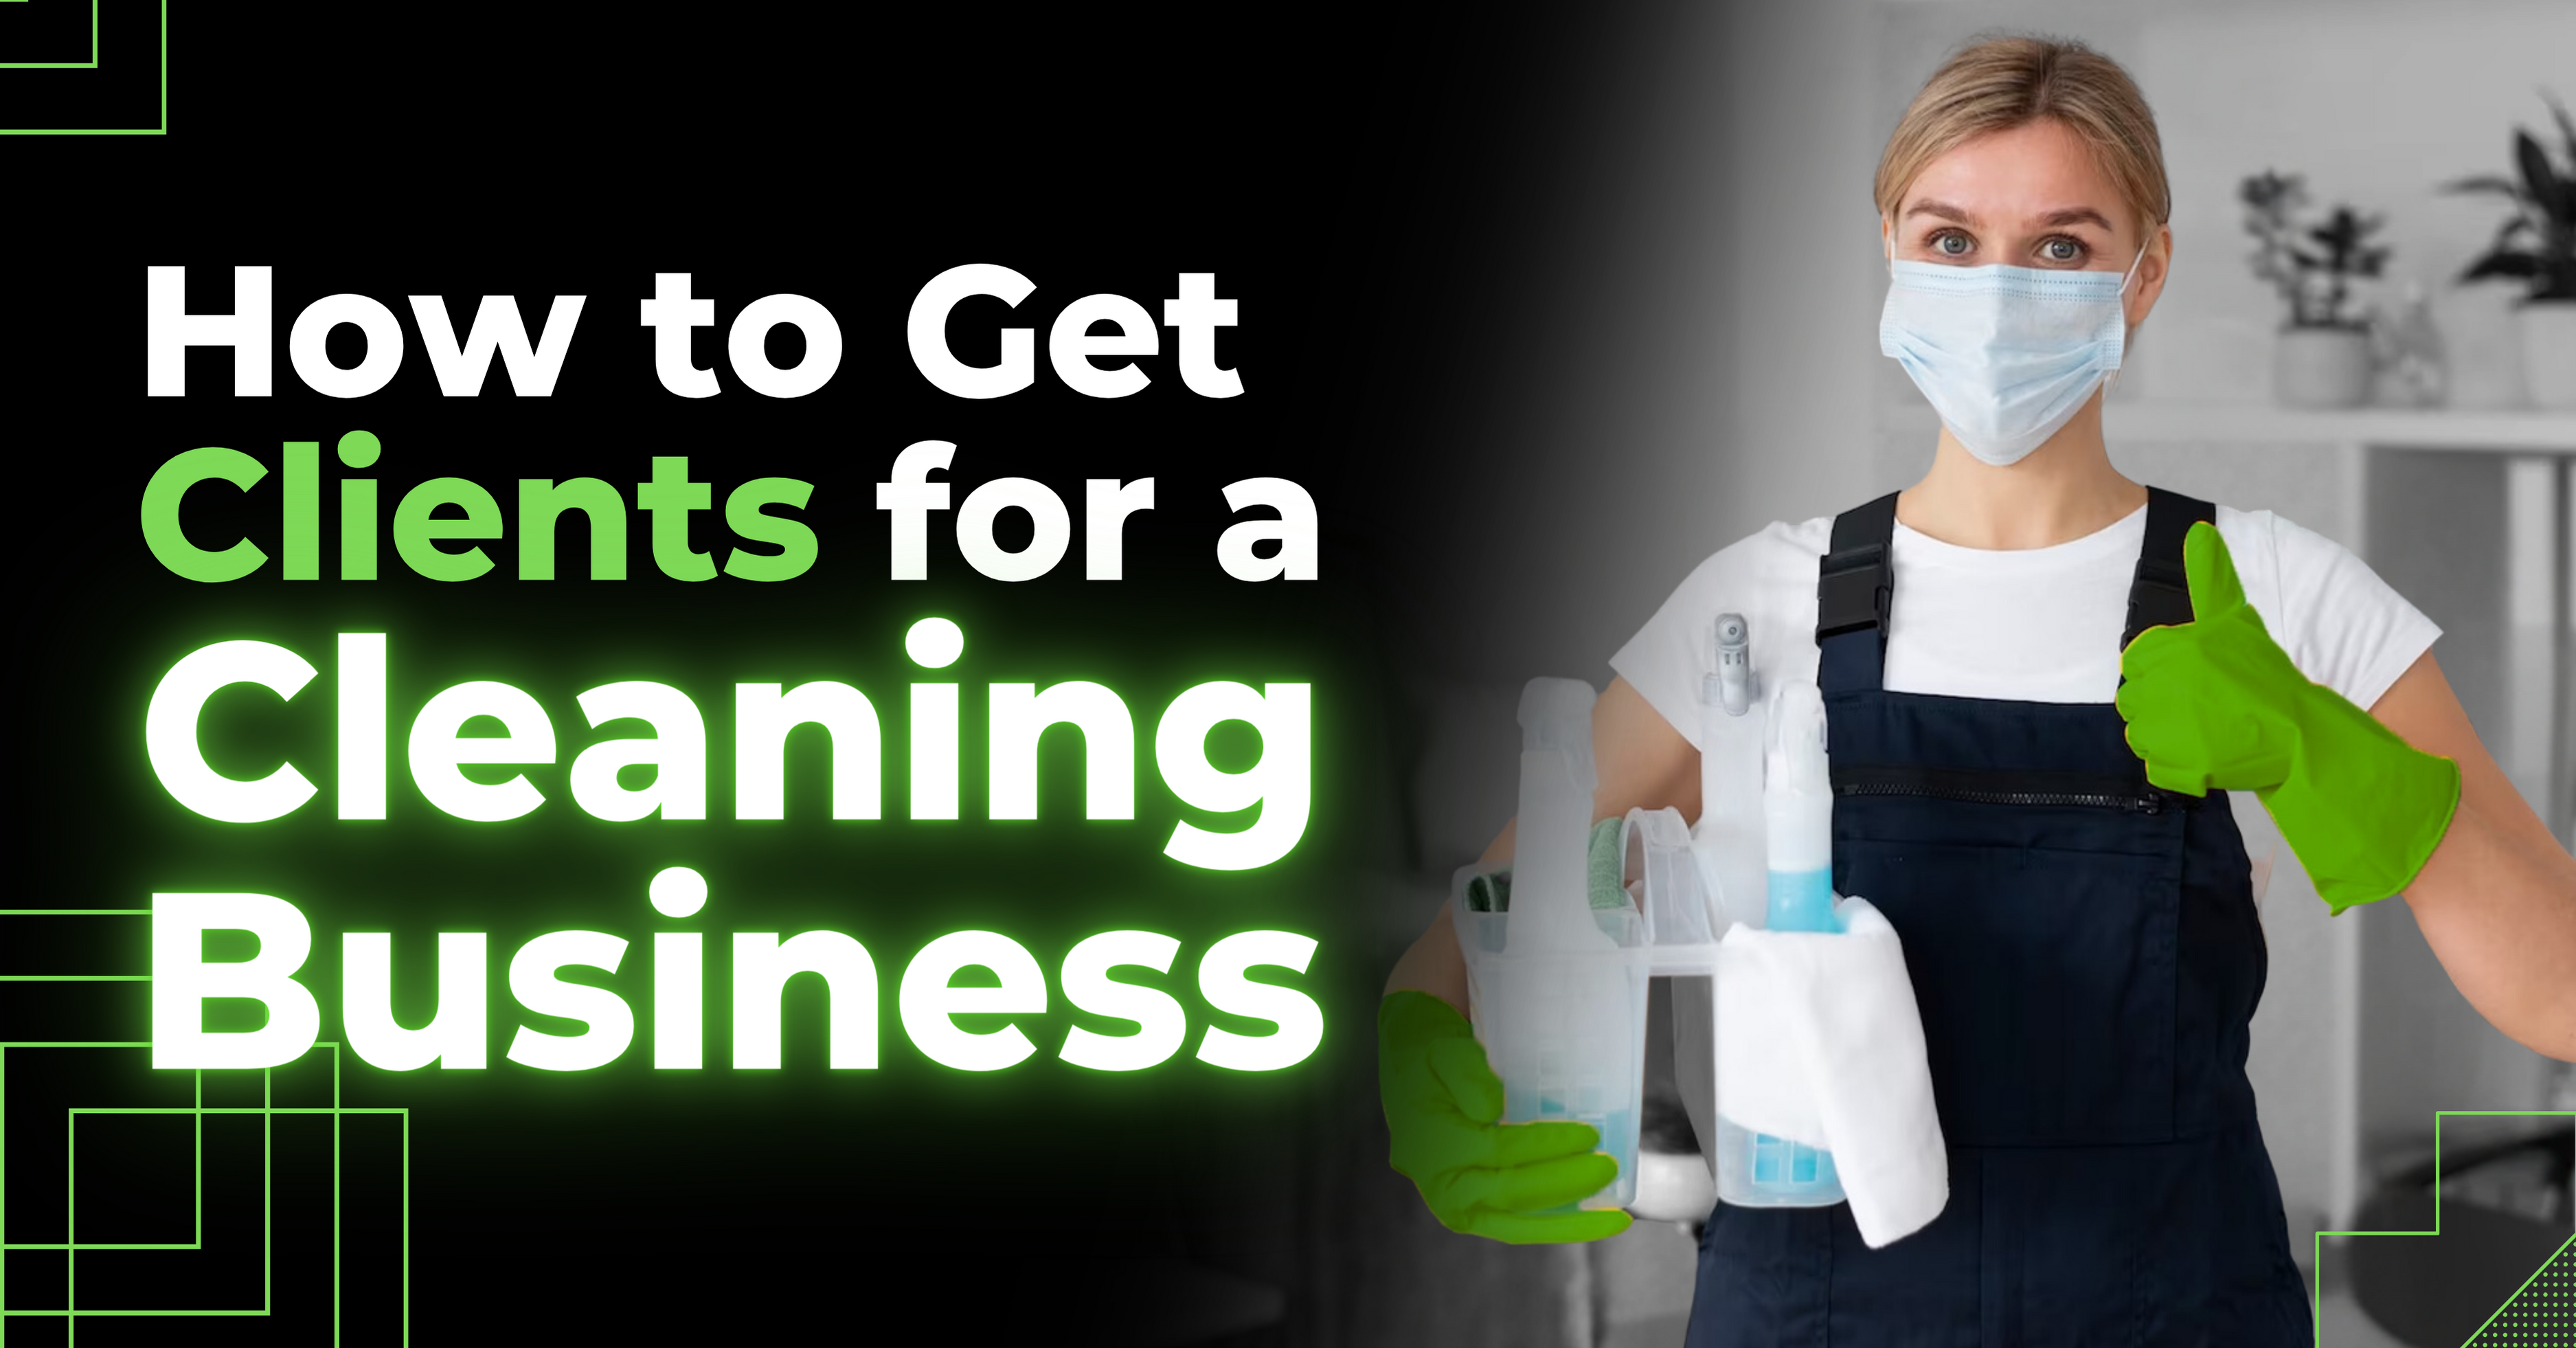 Get Clients for a Cleaning Business